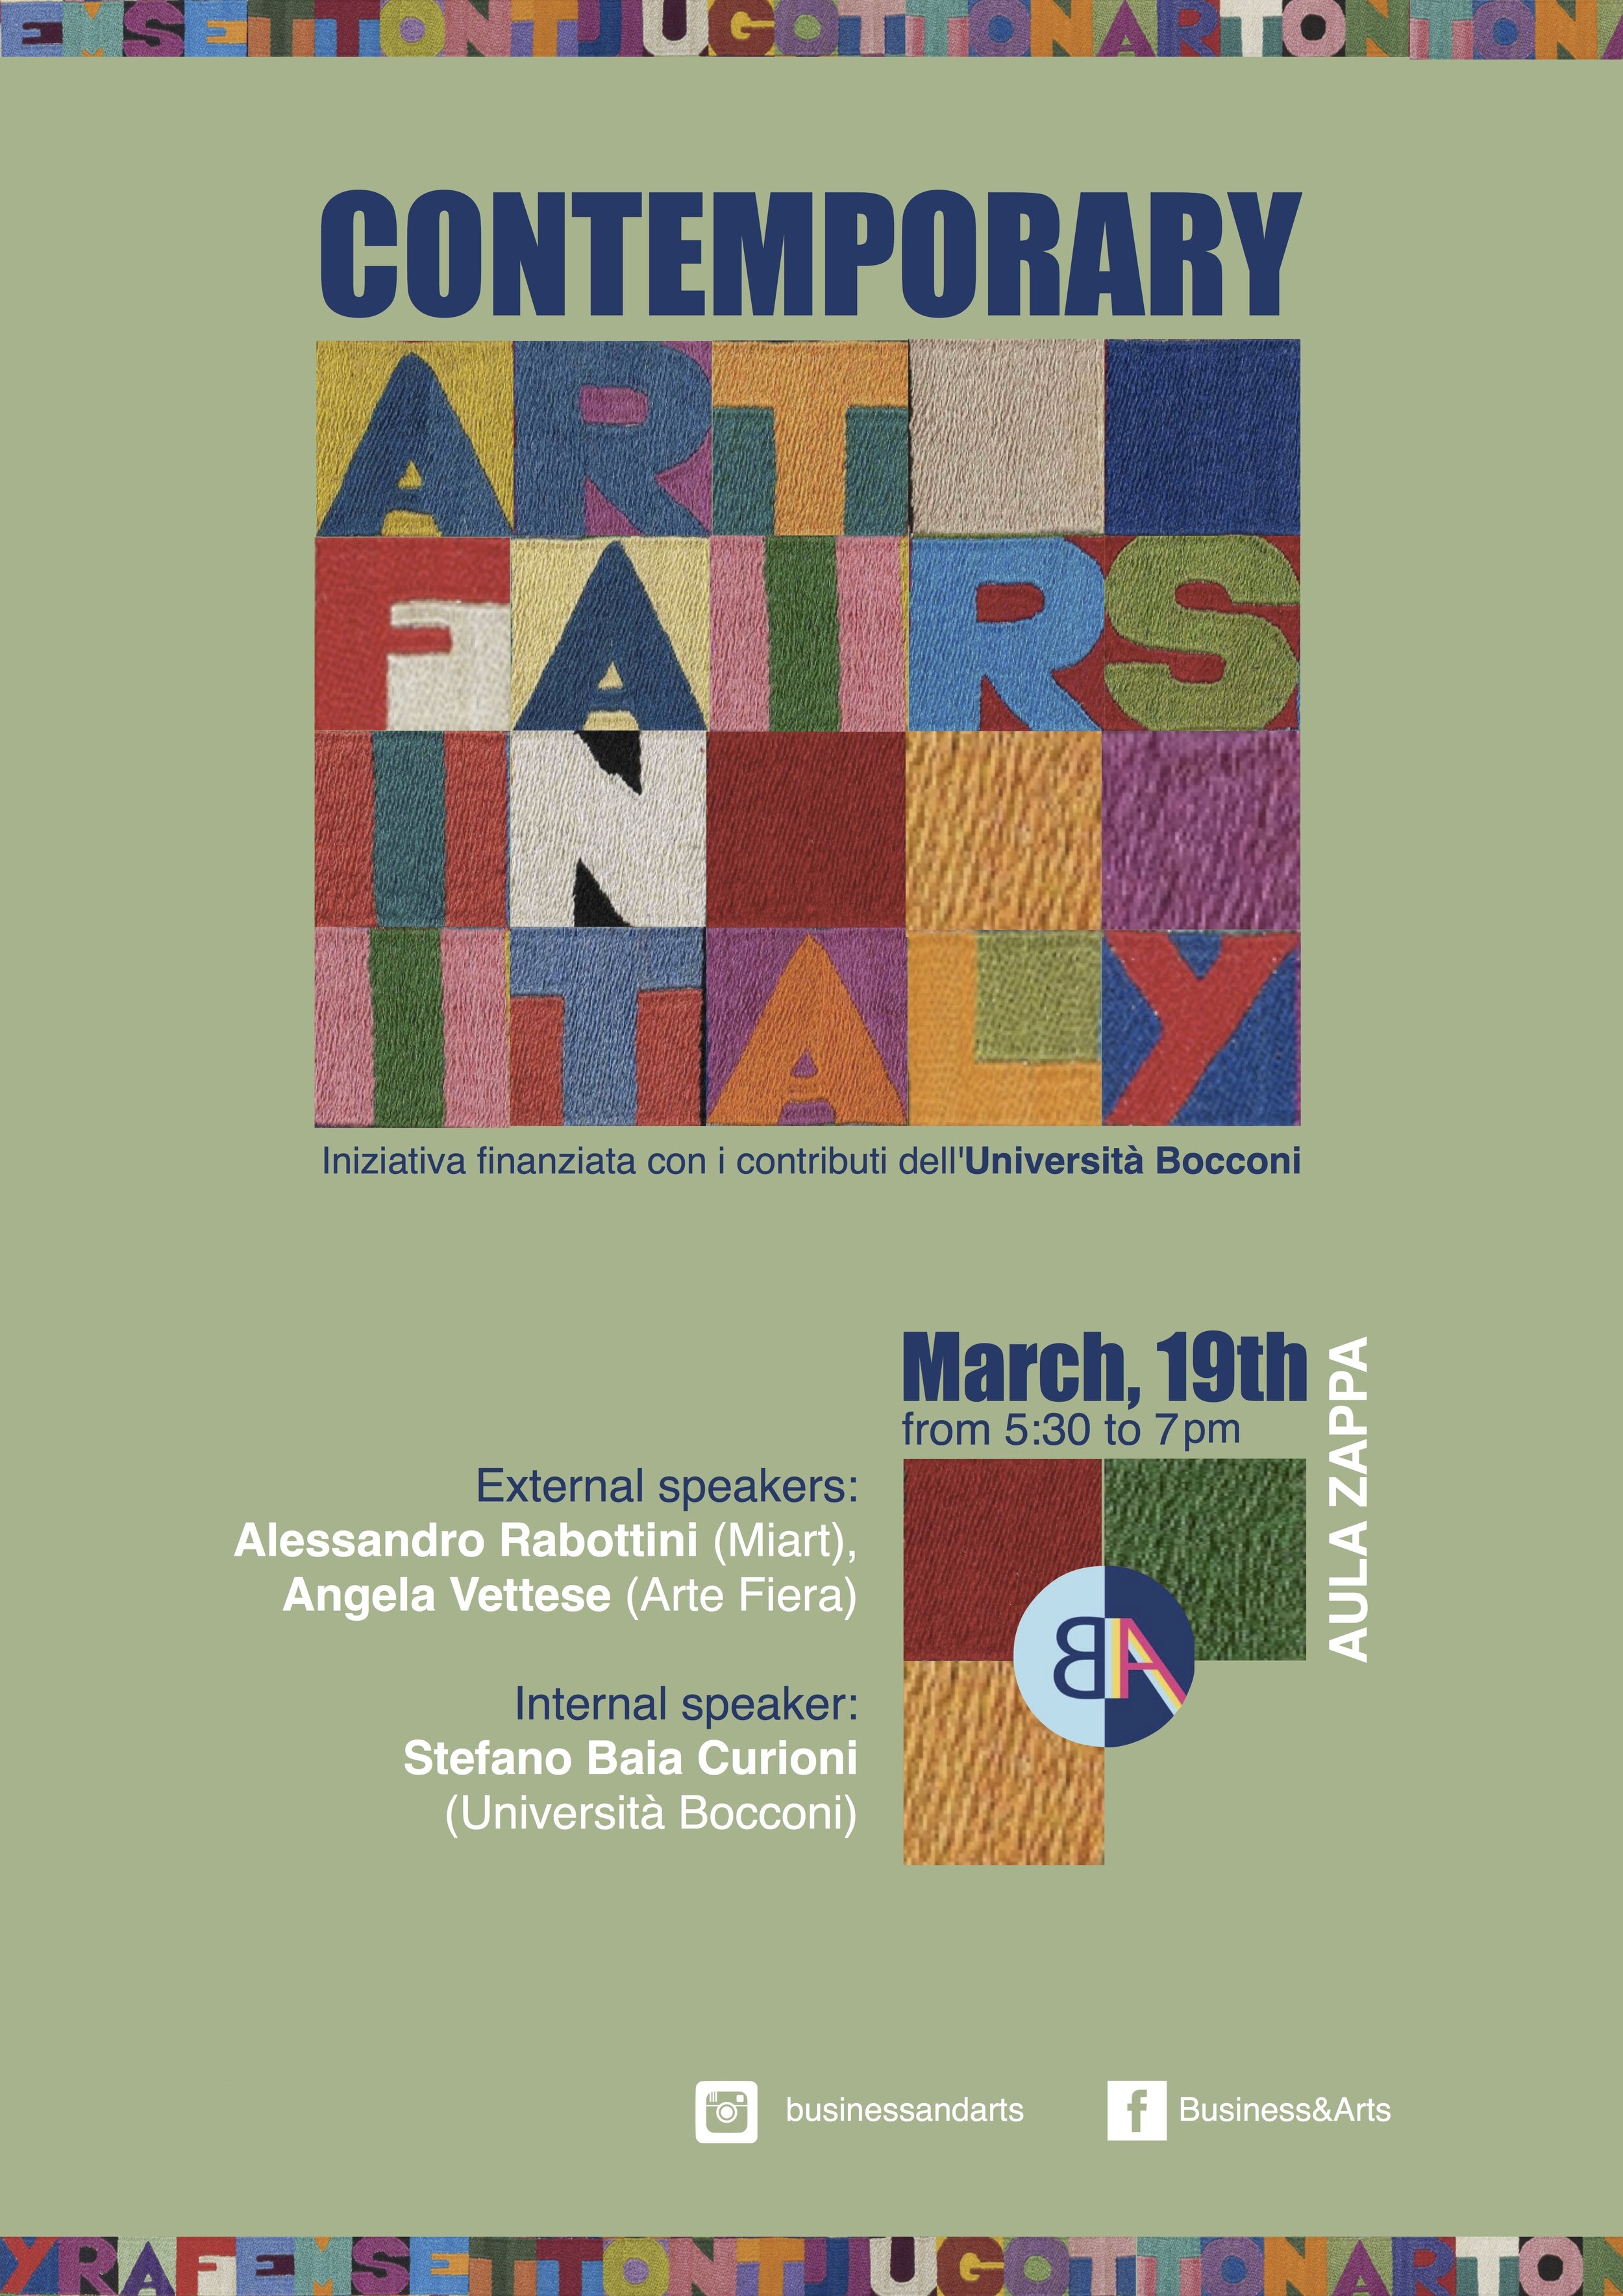 Contemporary_Art_fairs_in_Italy_Poster.jpg